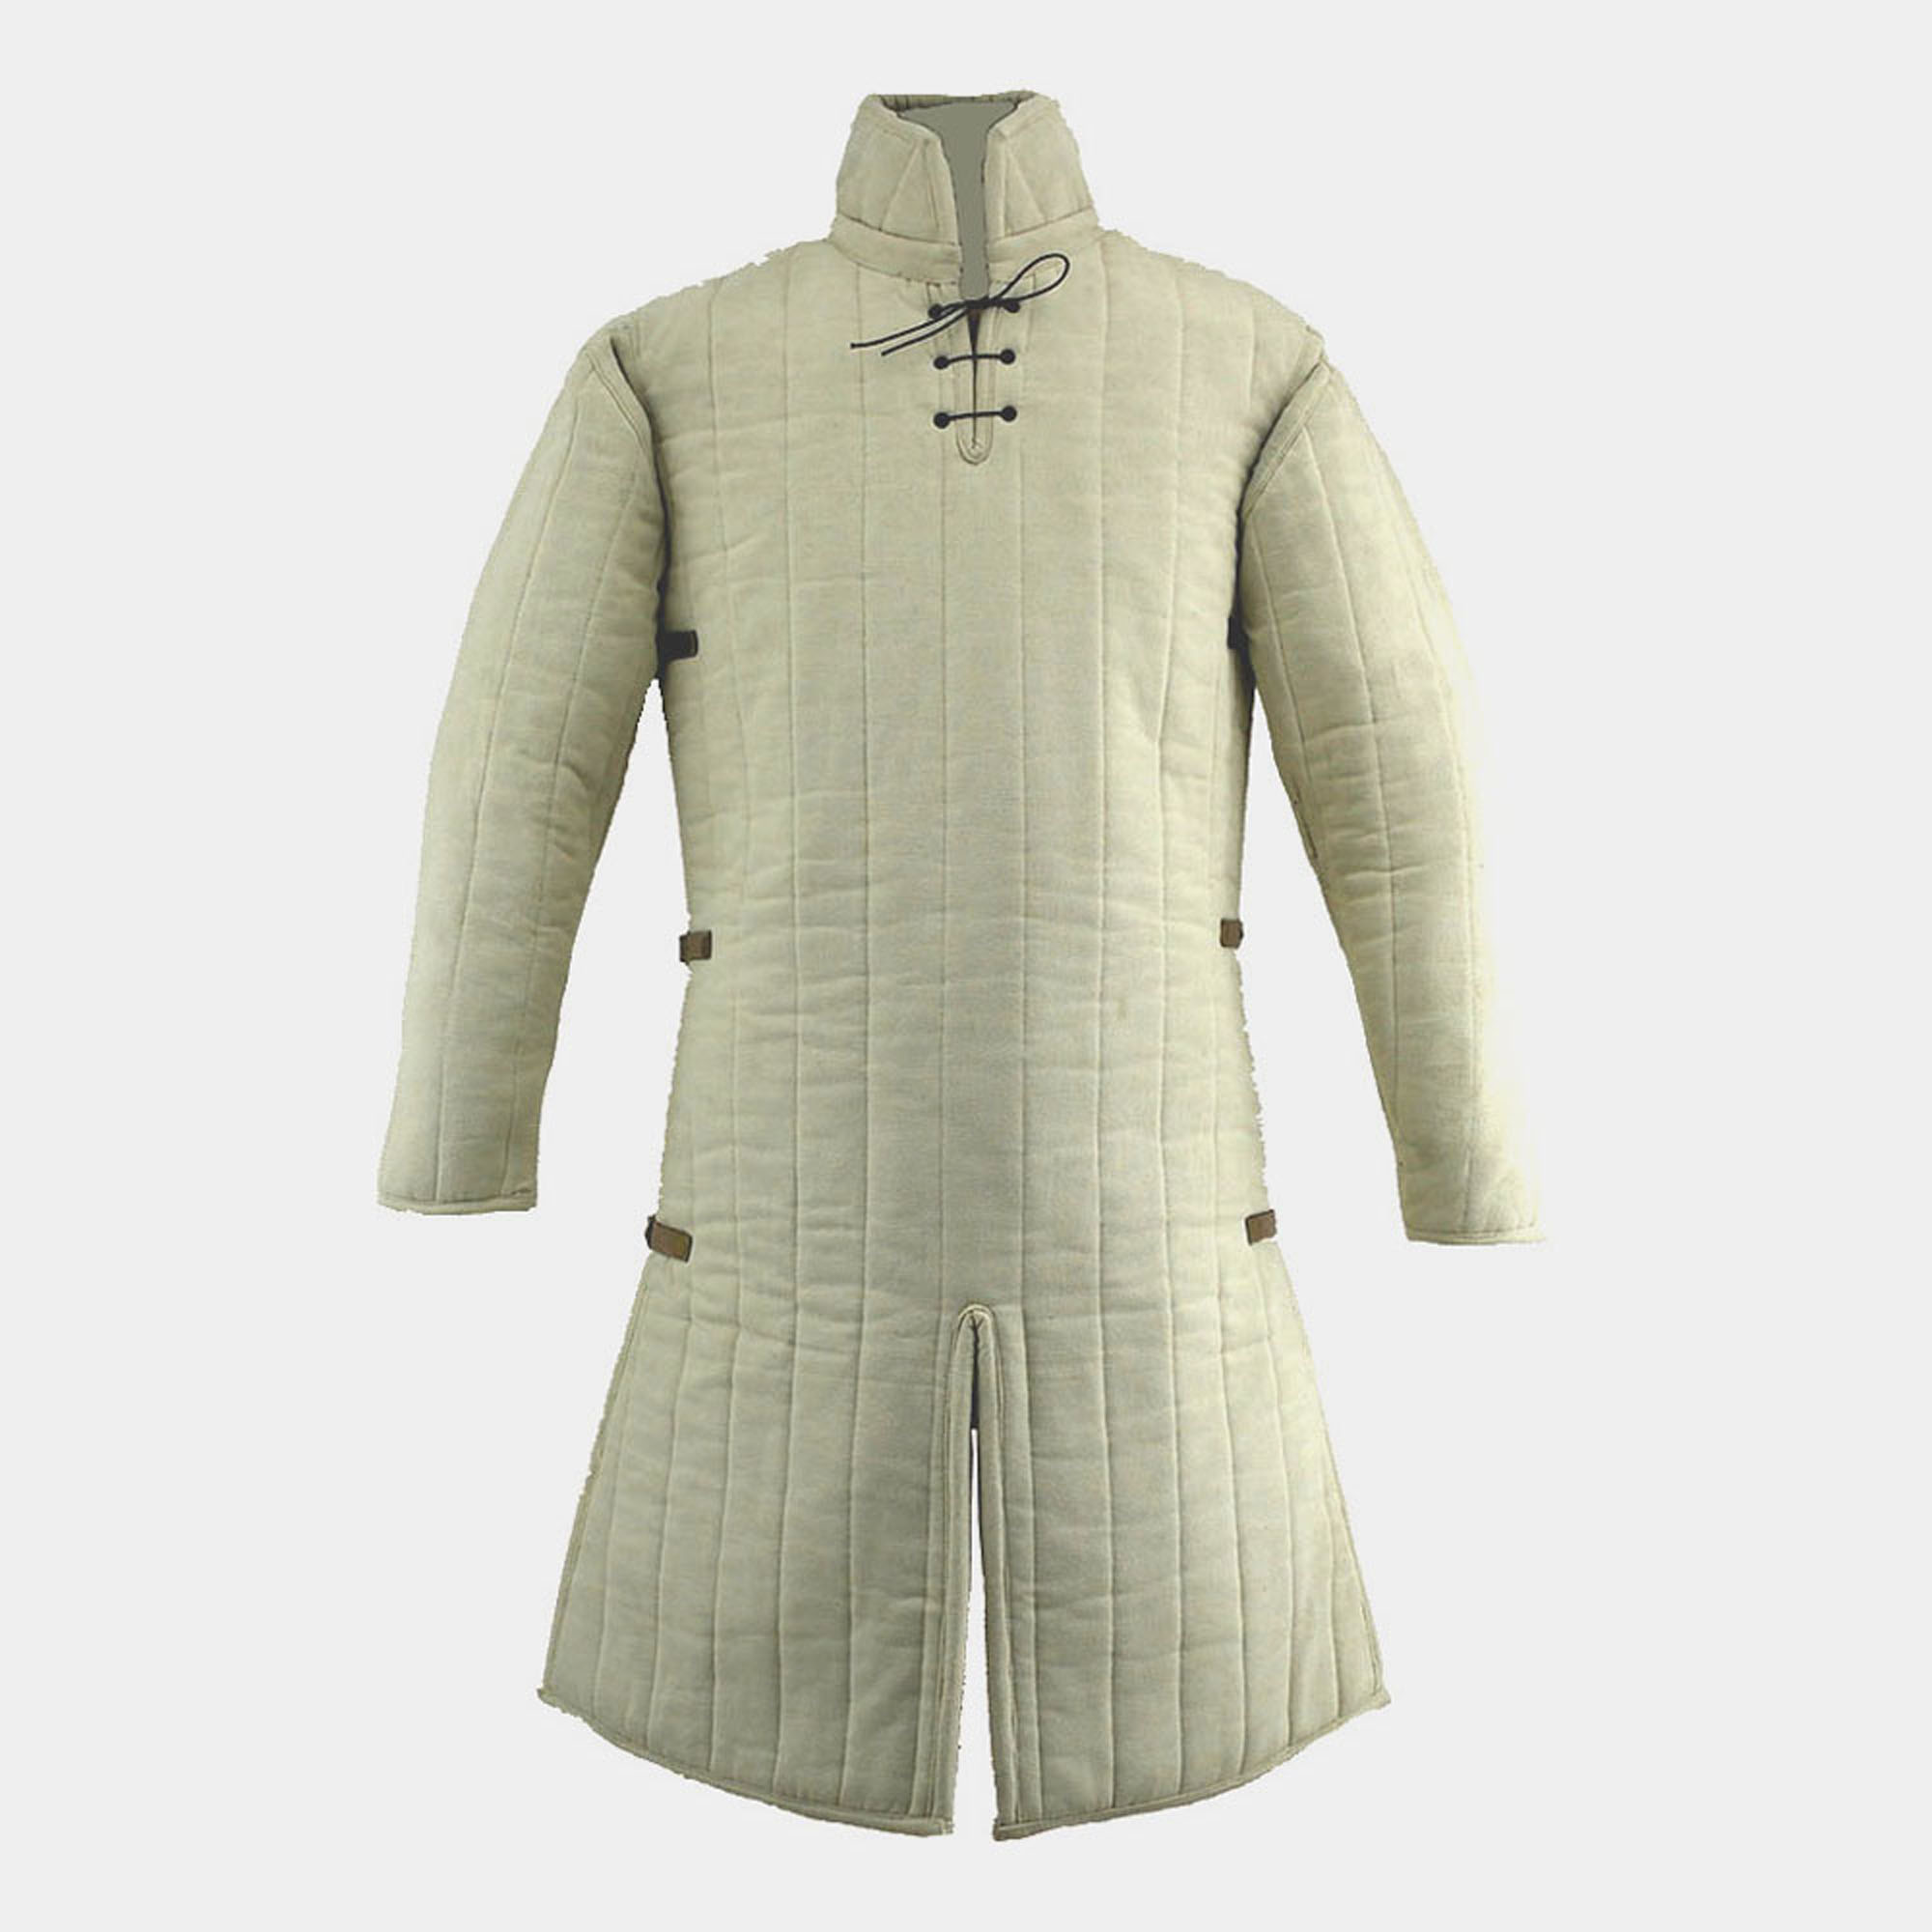  Medieval Thick Padded Full Sleeves Gambeson Coat